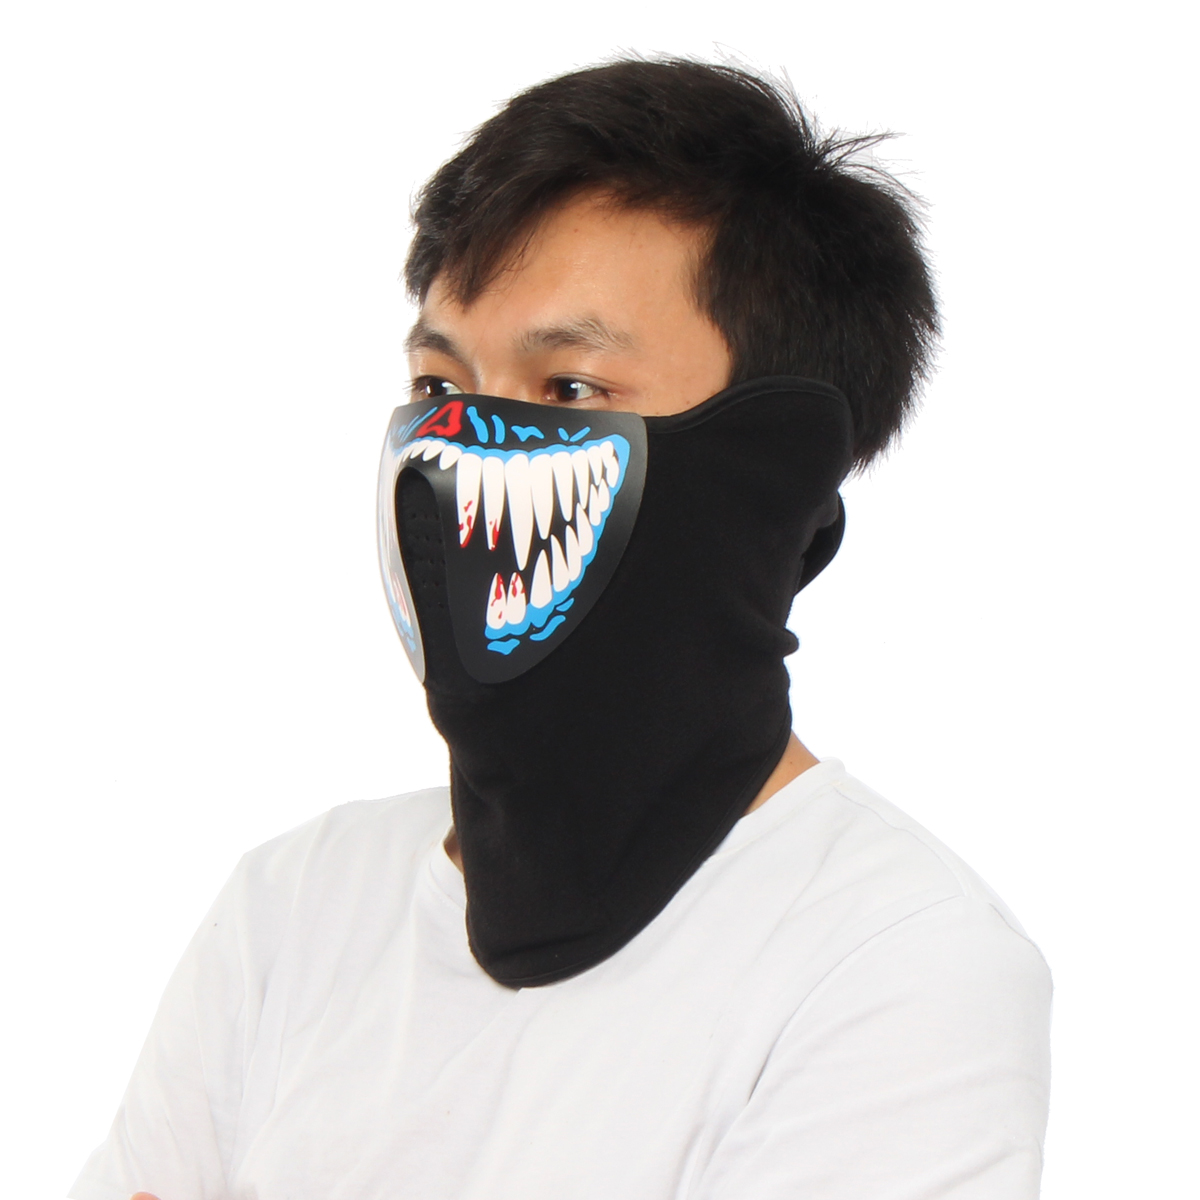 LED-Rave-Party-Face-Mask-Equalizer-Flashing-by-Music-Luminous-Cosplay-Dance-1332768-10